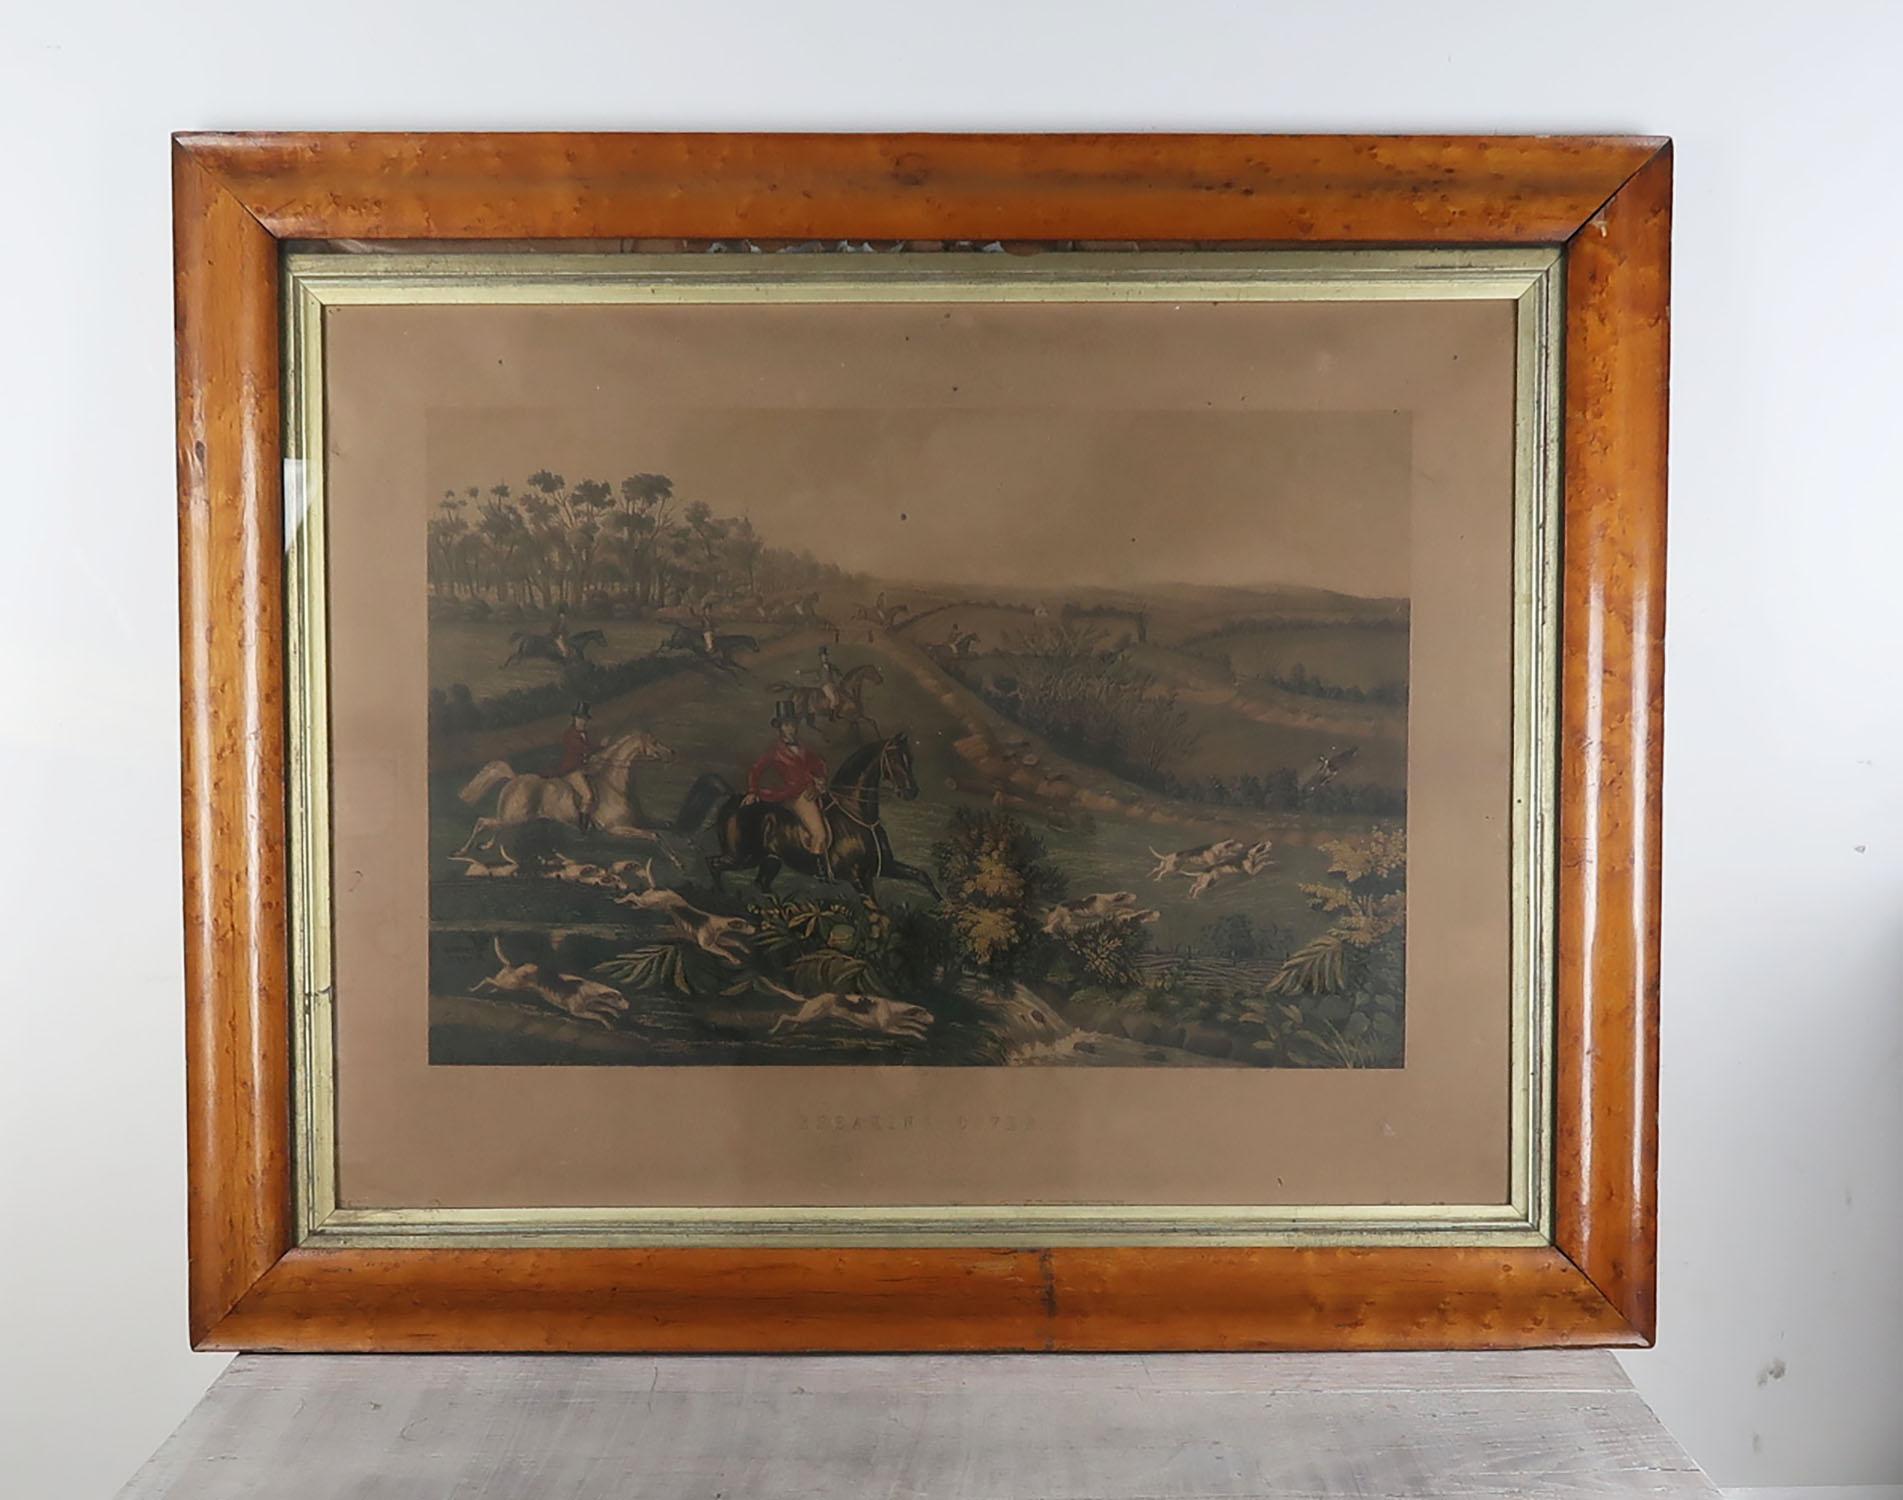 Amazing set of 4 sporting prints. All fox hunting related.

Country House condition

Wonderful muted colors.

In the original bird's-eye maple frames.

Lithographs with original color.

Published by F.Sala & Co., Berlin, Germany.

All